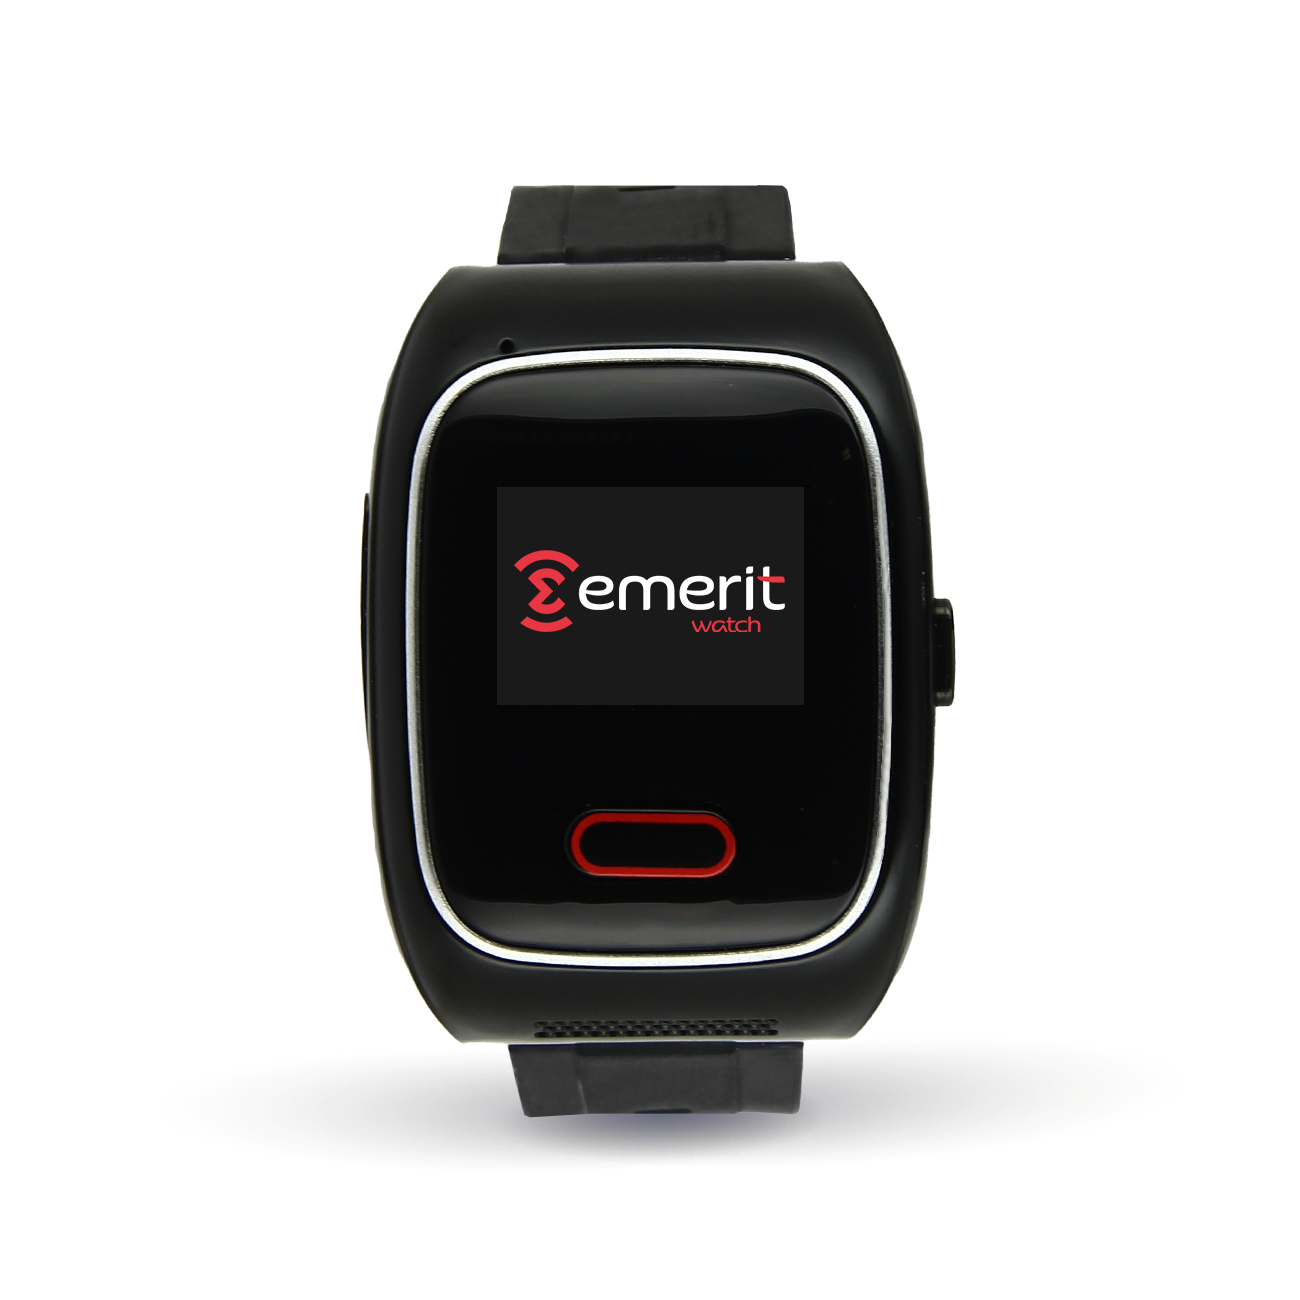 personal safety alarm device Emerit Watch